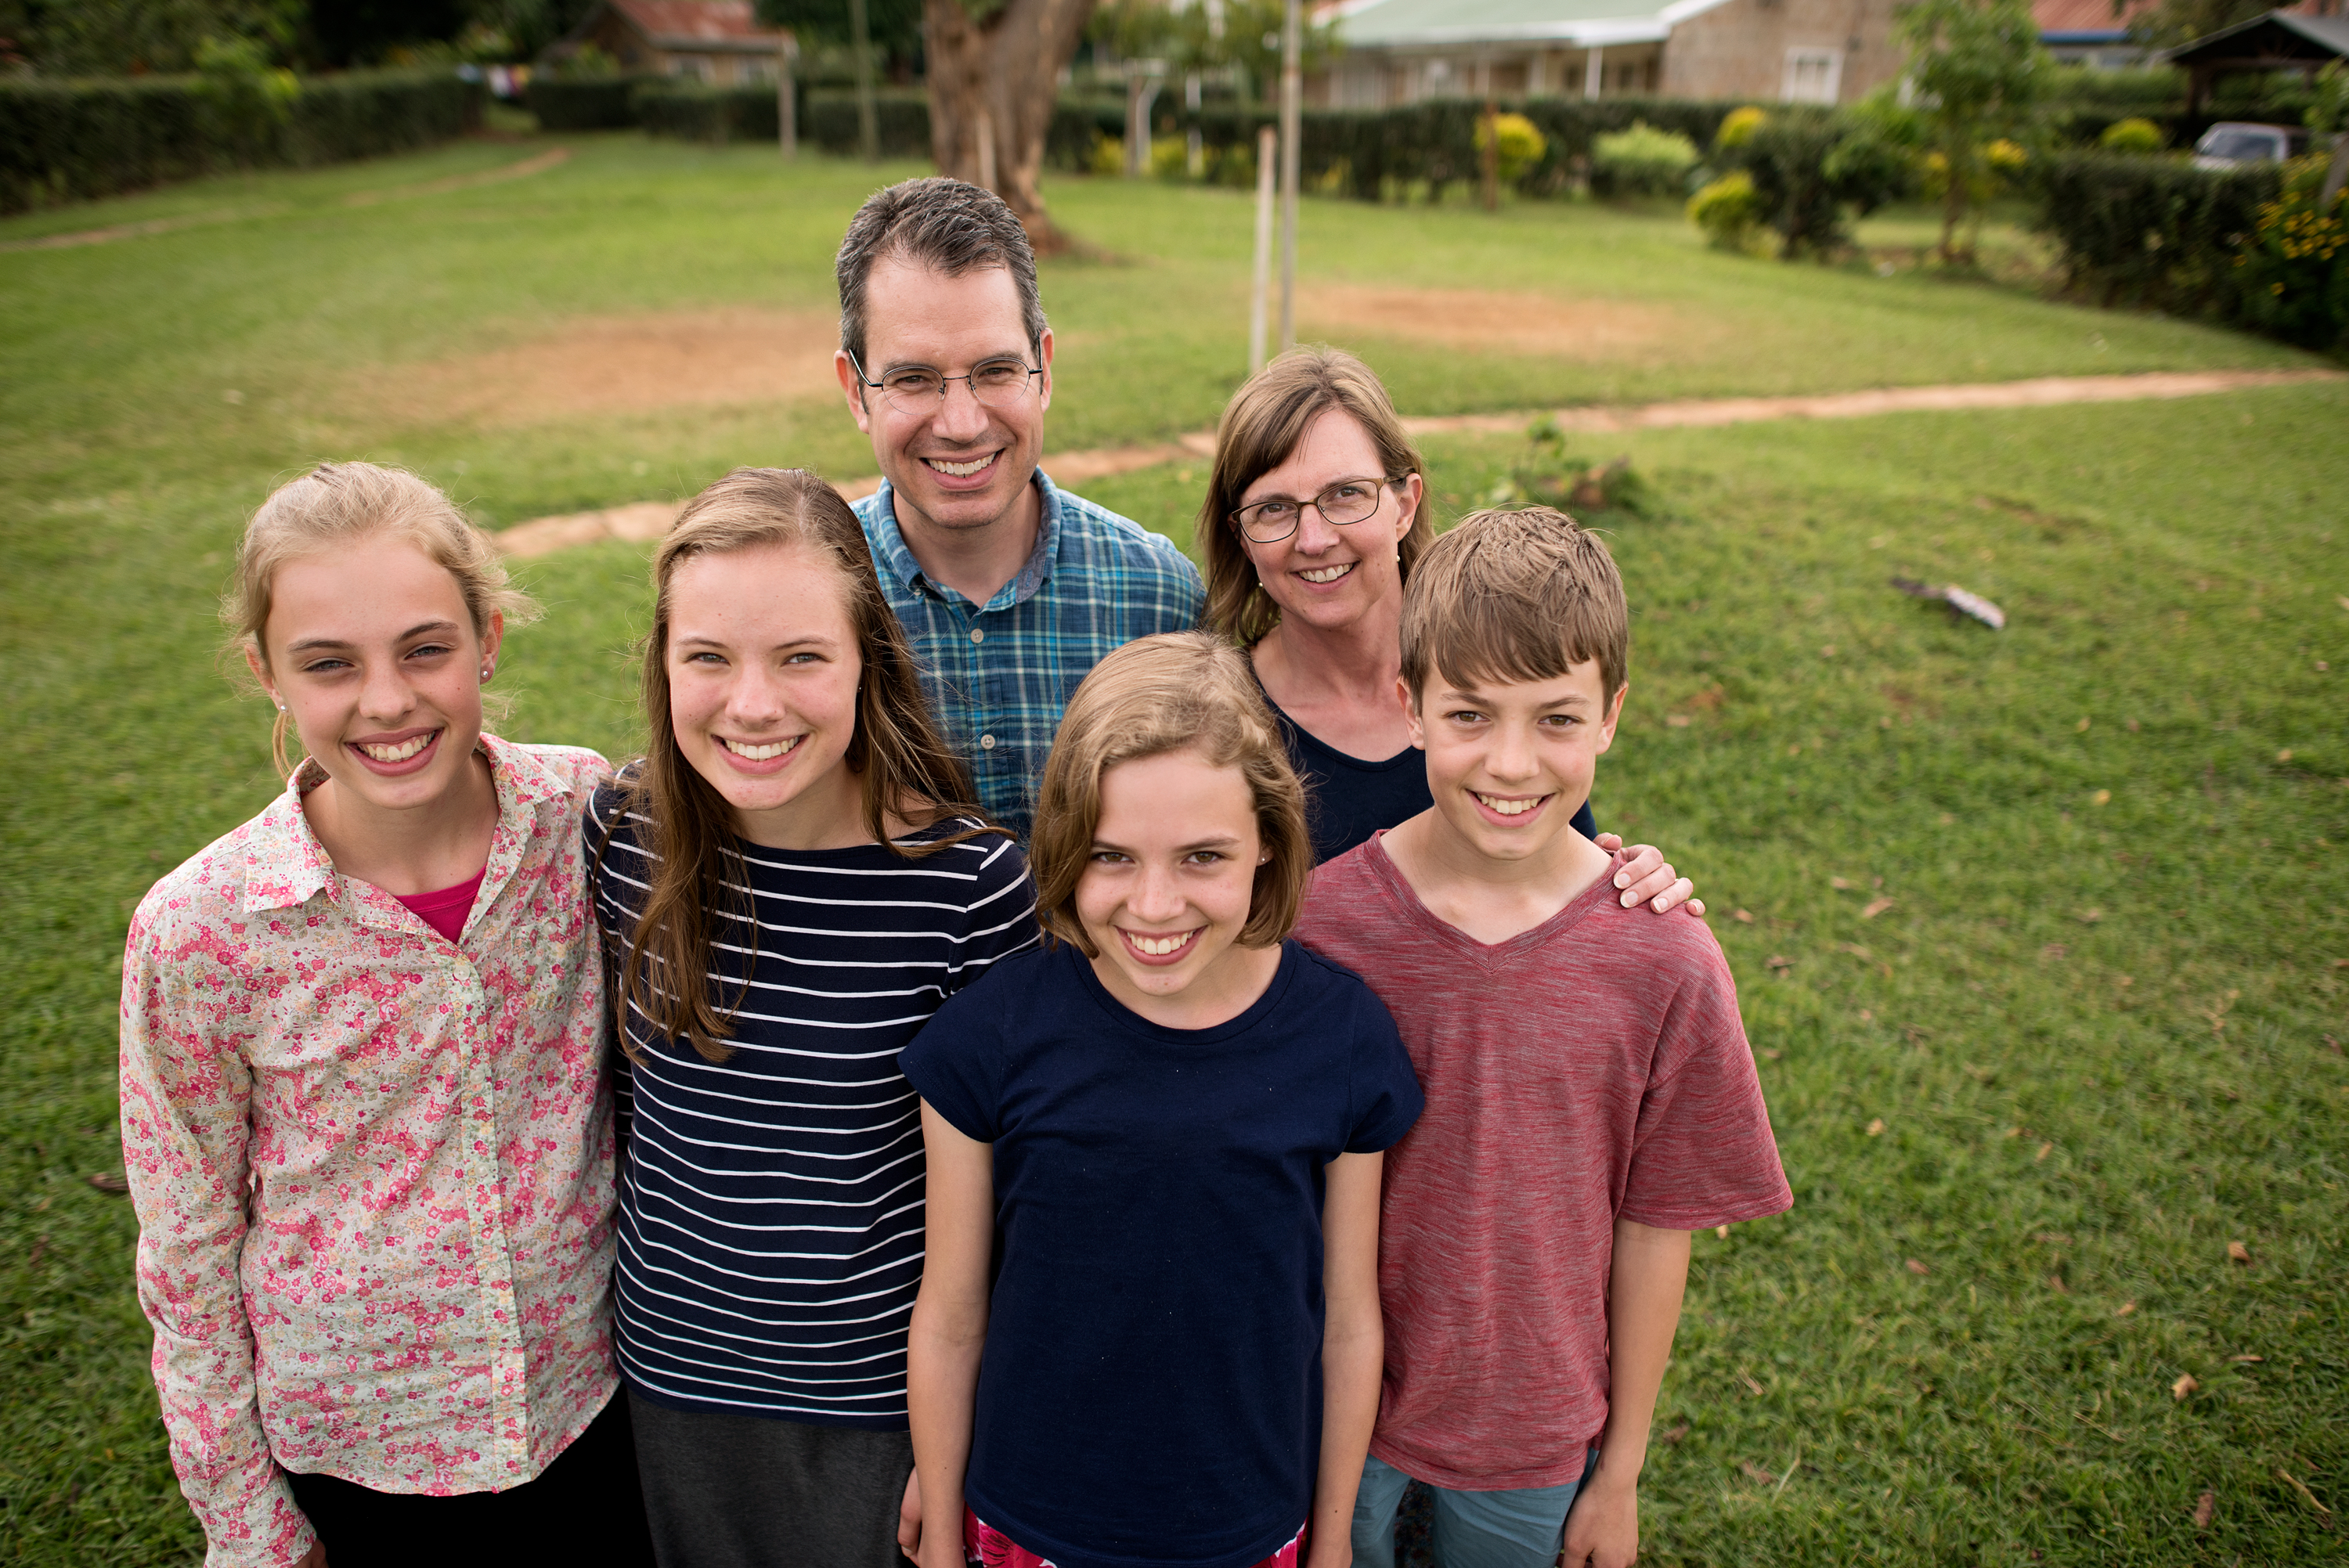 He and his wife, Susan, are shown with children, from left, Anna, Sarah Grace, Hope, and Josiah.